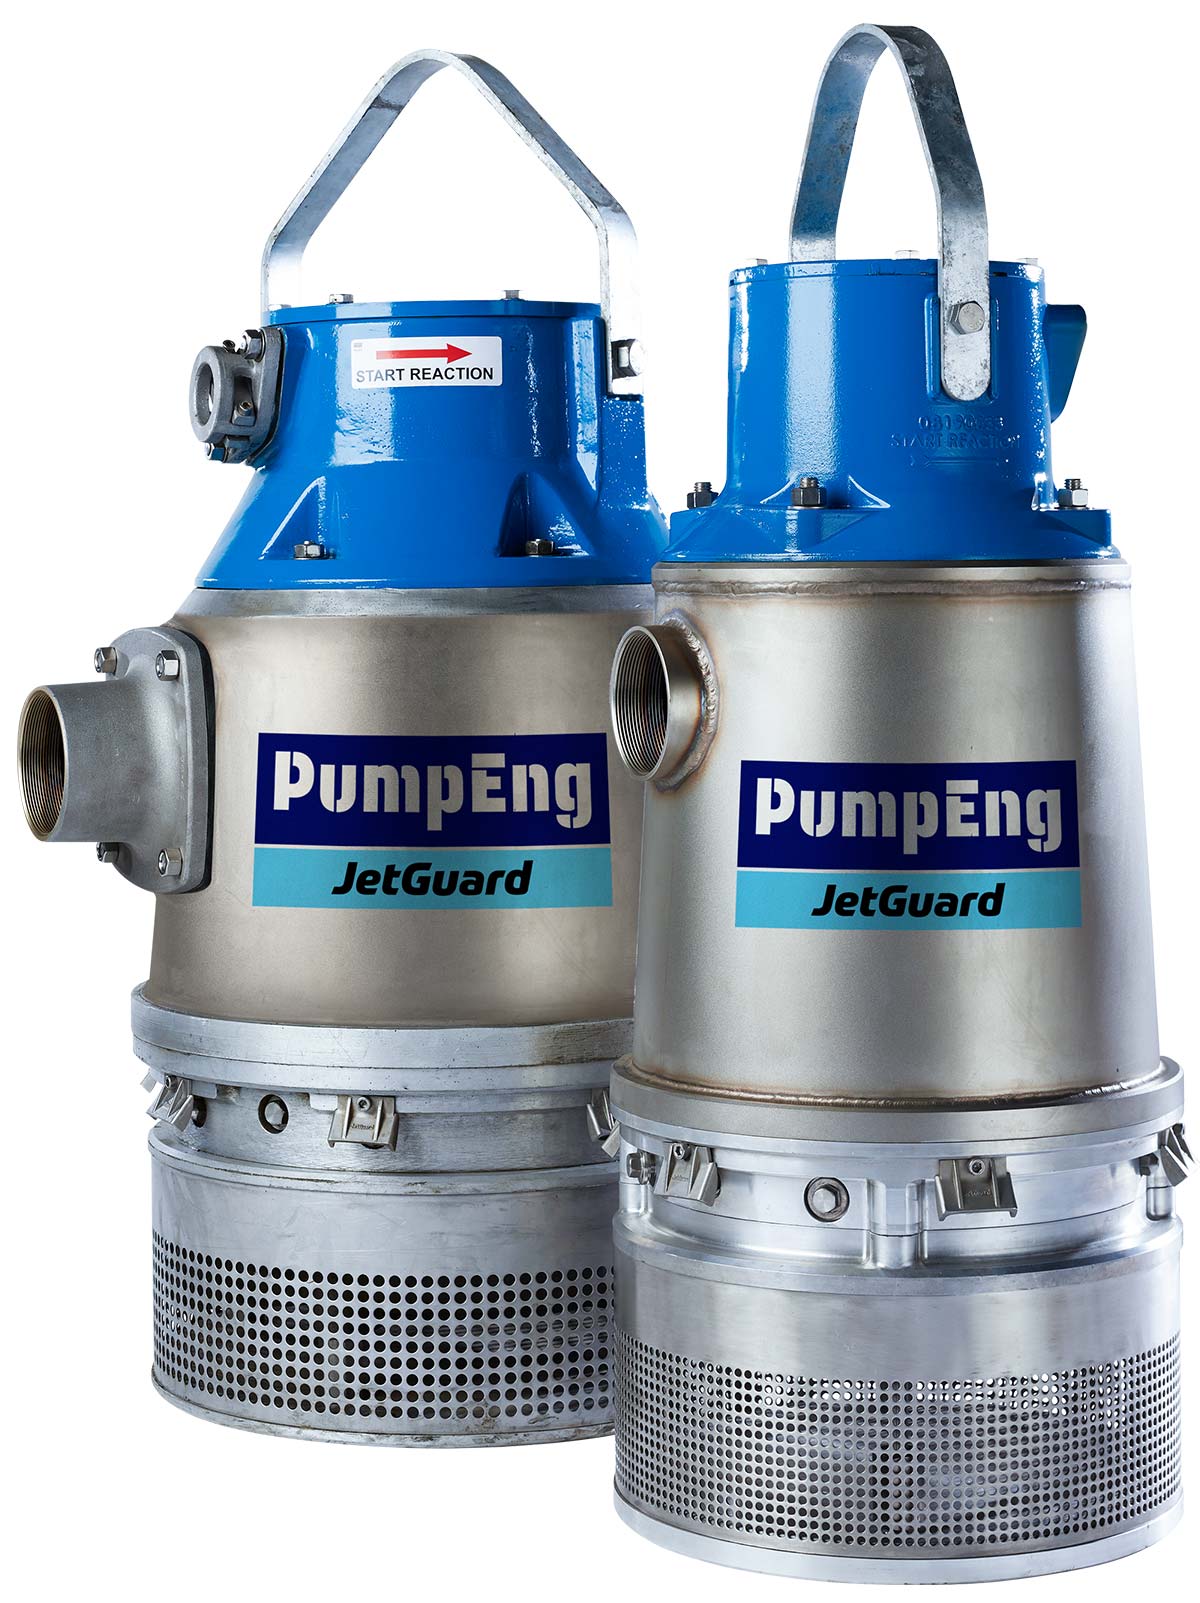 Two JetGuard (20Kw 10Kw) underground mine dewatering pumps with the PumpEng brand printed on the front